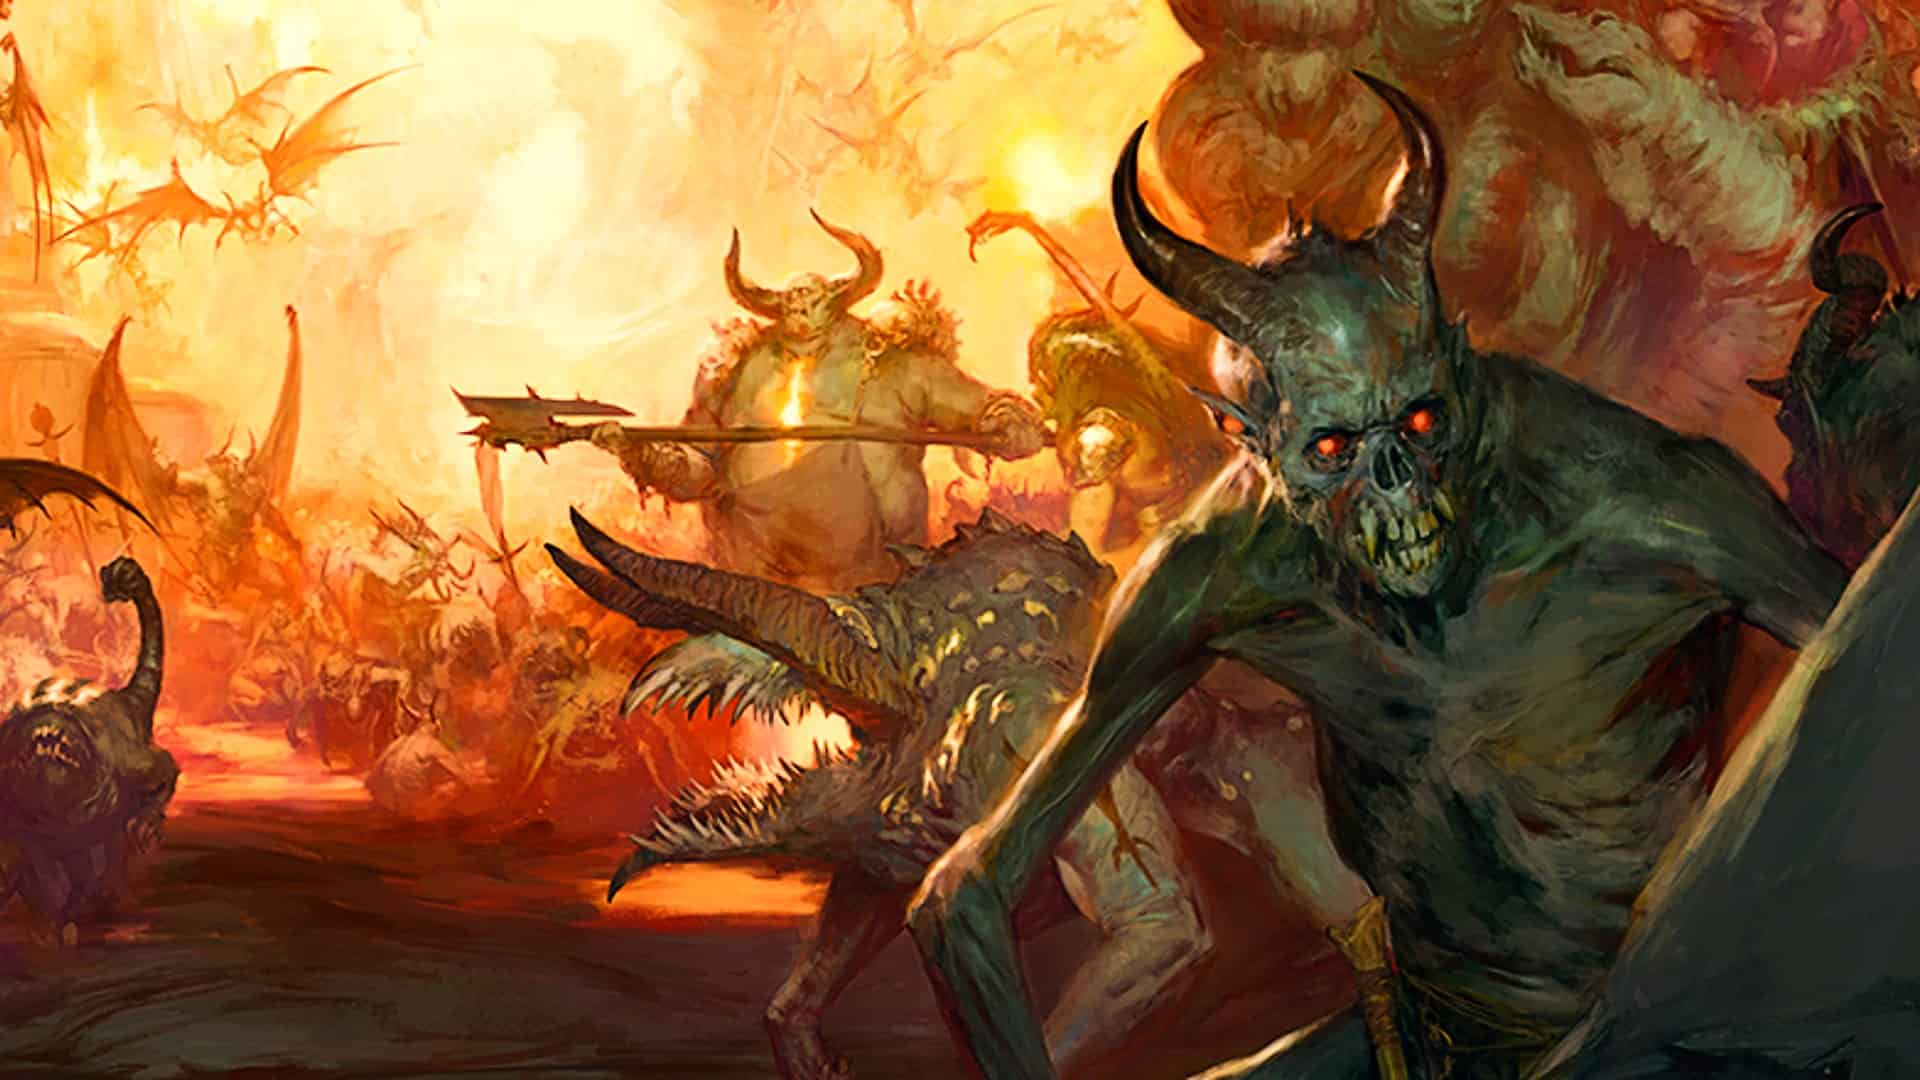 Diablo 4 should take notes from Path of Exile 2, according to players